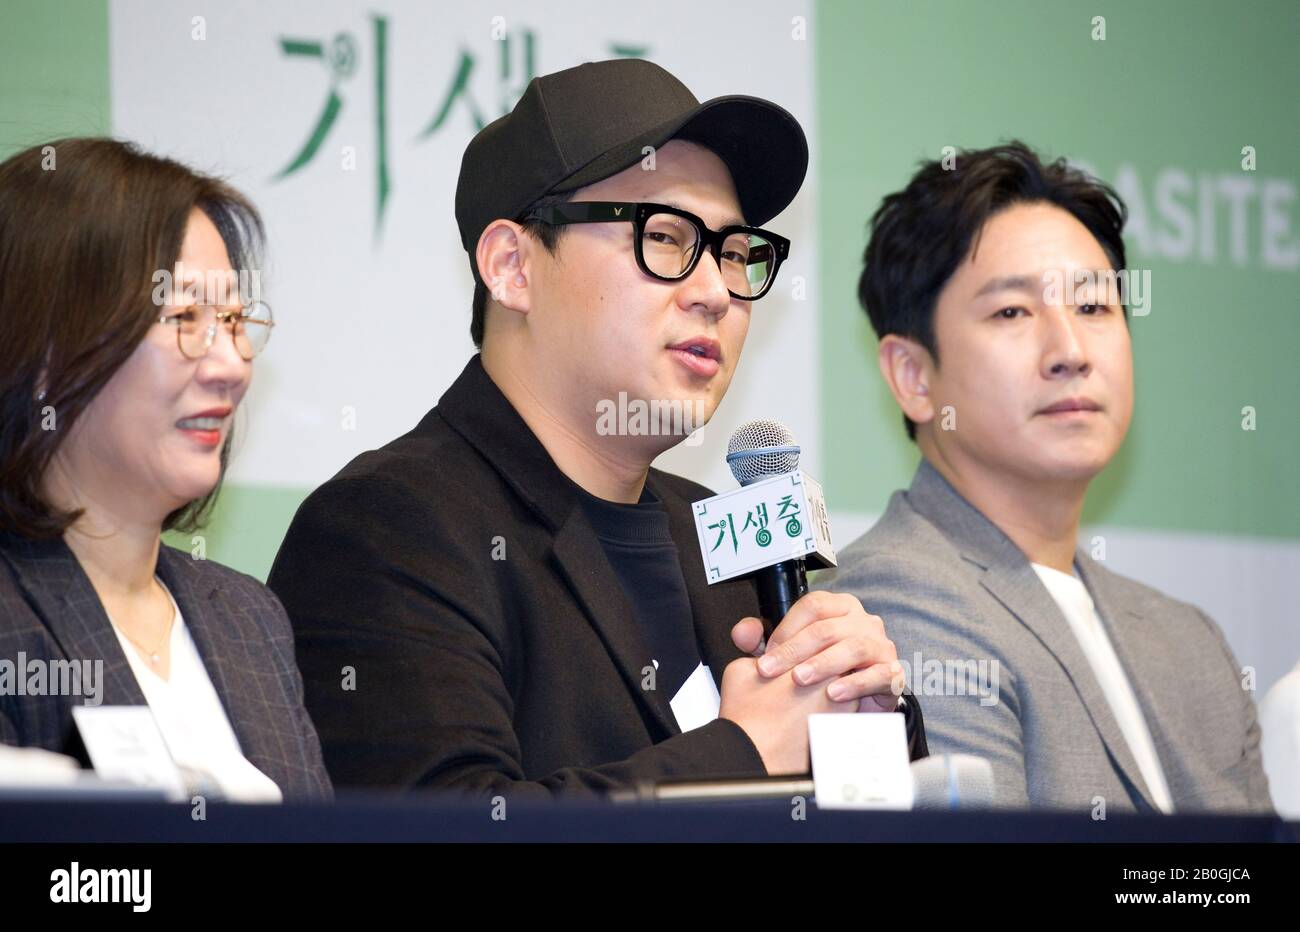 Kwak Sin-Ae, Han Jin-Won and Lee Sun-Kyun, Feb 19, 2020 : (L-R) The CEO of the Barunson Entertainment & Arts Corporation and a film producer of the Oscar-winning film 'Parasite' Kwak Sin-Ae, a co-screenwriter of the movie Han Jin-Won and a cast member of movie Lee Sun-Kyun attend a press conference in Seoul, South Korea. Korean black comedy thriller 'Parasite' won four Oscar titles at the Academy Awards on Feb 9, 2020, becoming the first non-English language film to win the Oscars Best Picture in its 92-year history. Credit: Lee Jae-Won/AFLO/Alamy Live News Stock Photo